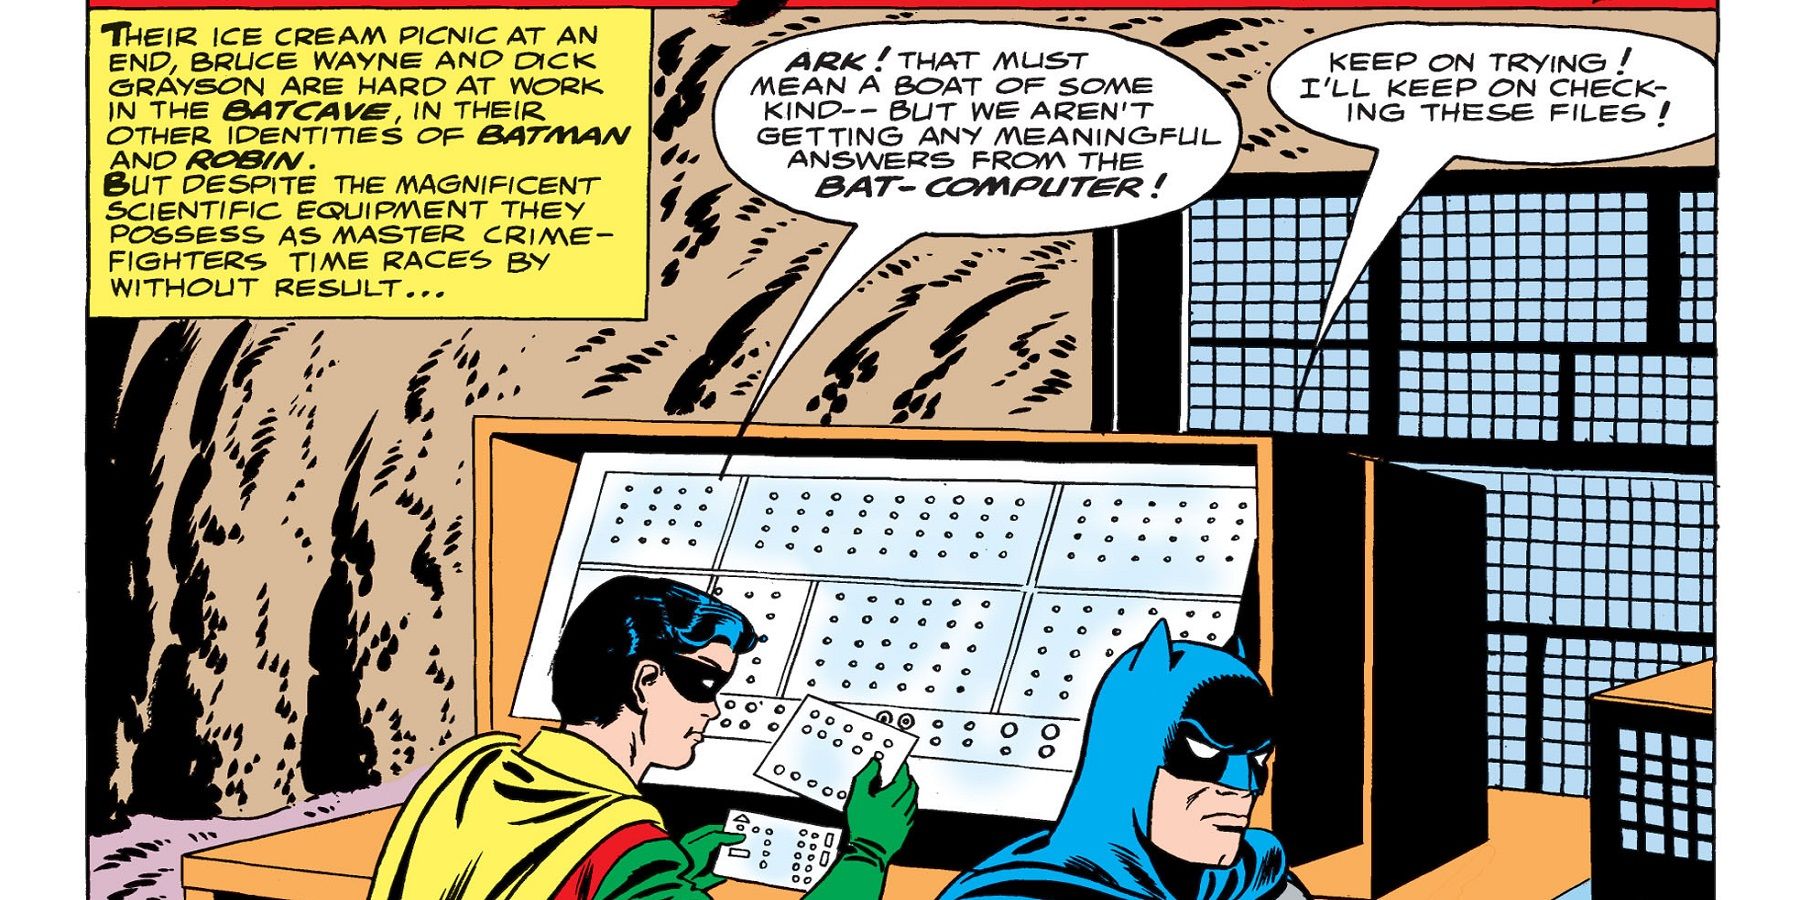 The First Appearance Of The Bat-Computer